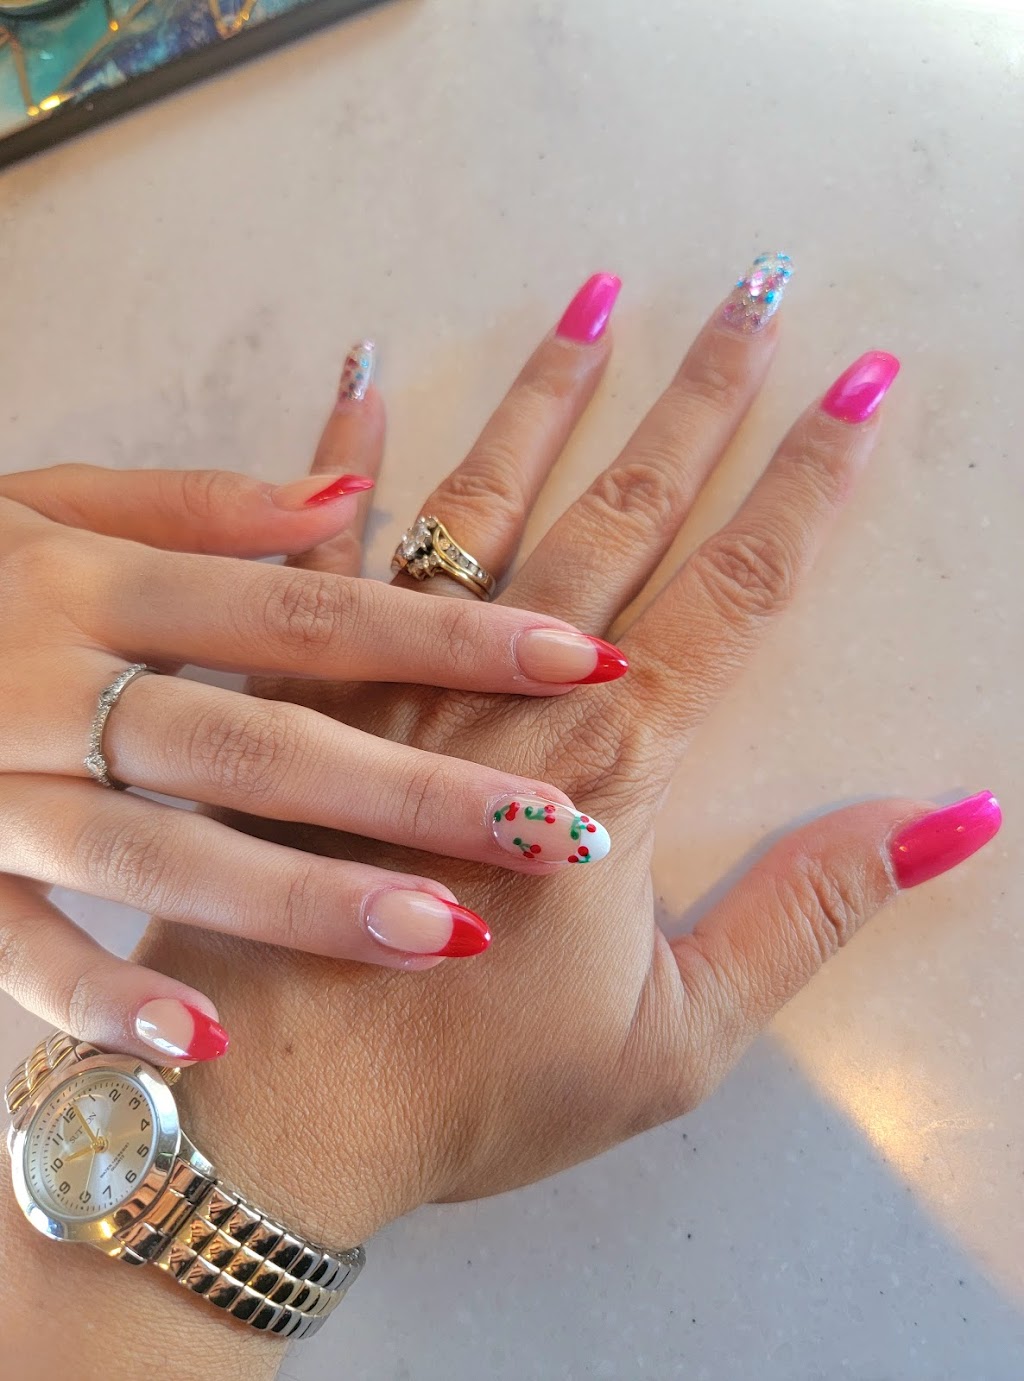 Queen B Nails & Spa | 2630 S Tracy Blvd #120, Tracy, CA 95376, USA | Phone: (209) 833-6245